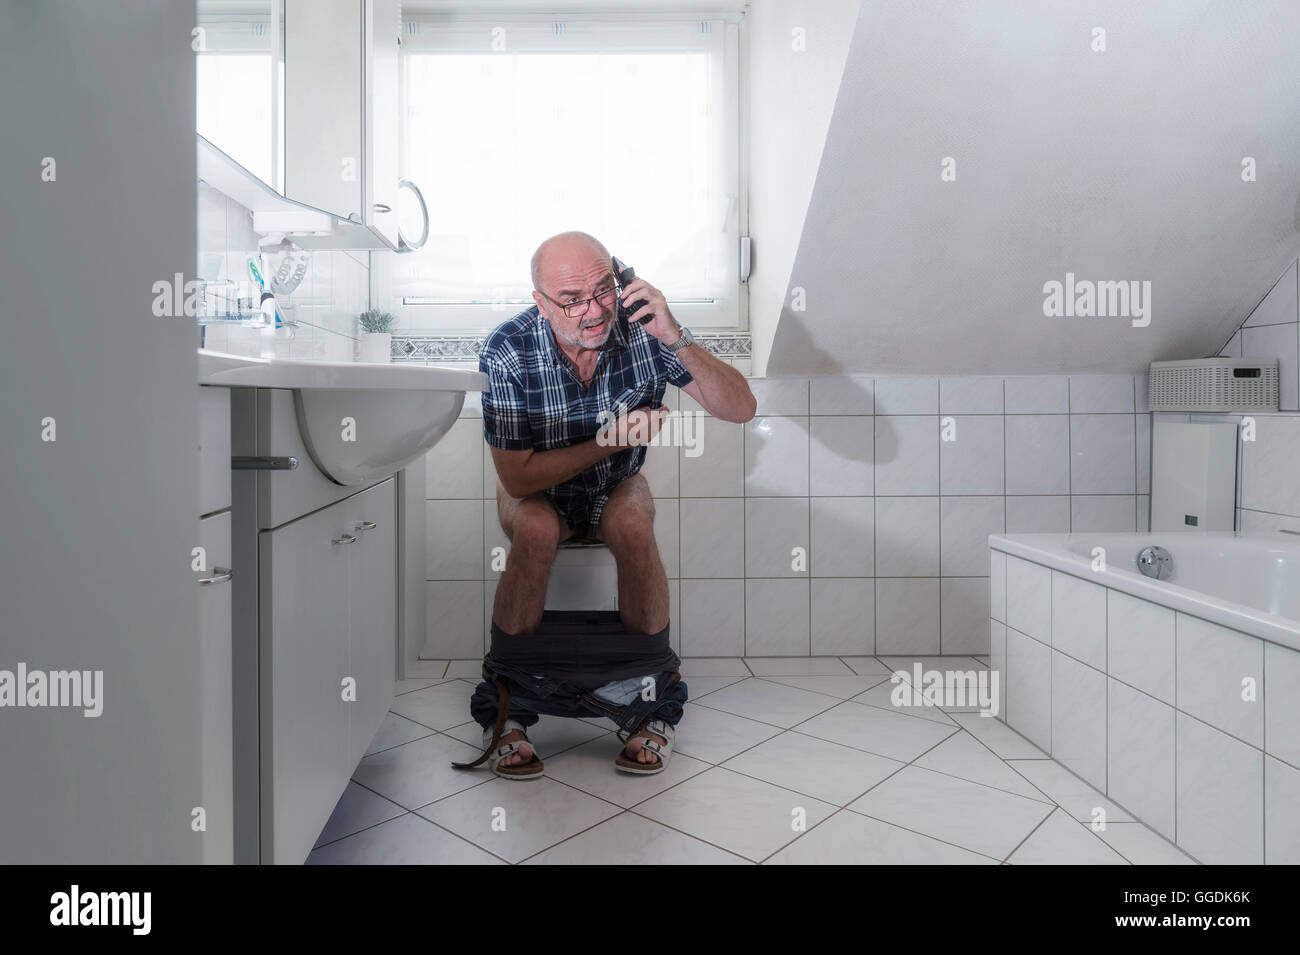 Senior man sitting on the toilet, talking into a smartphone, Germany Stock Photo